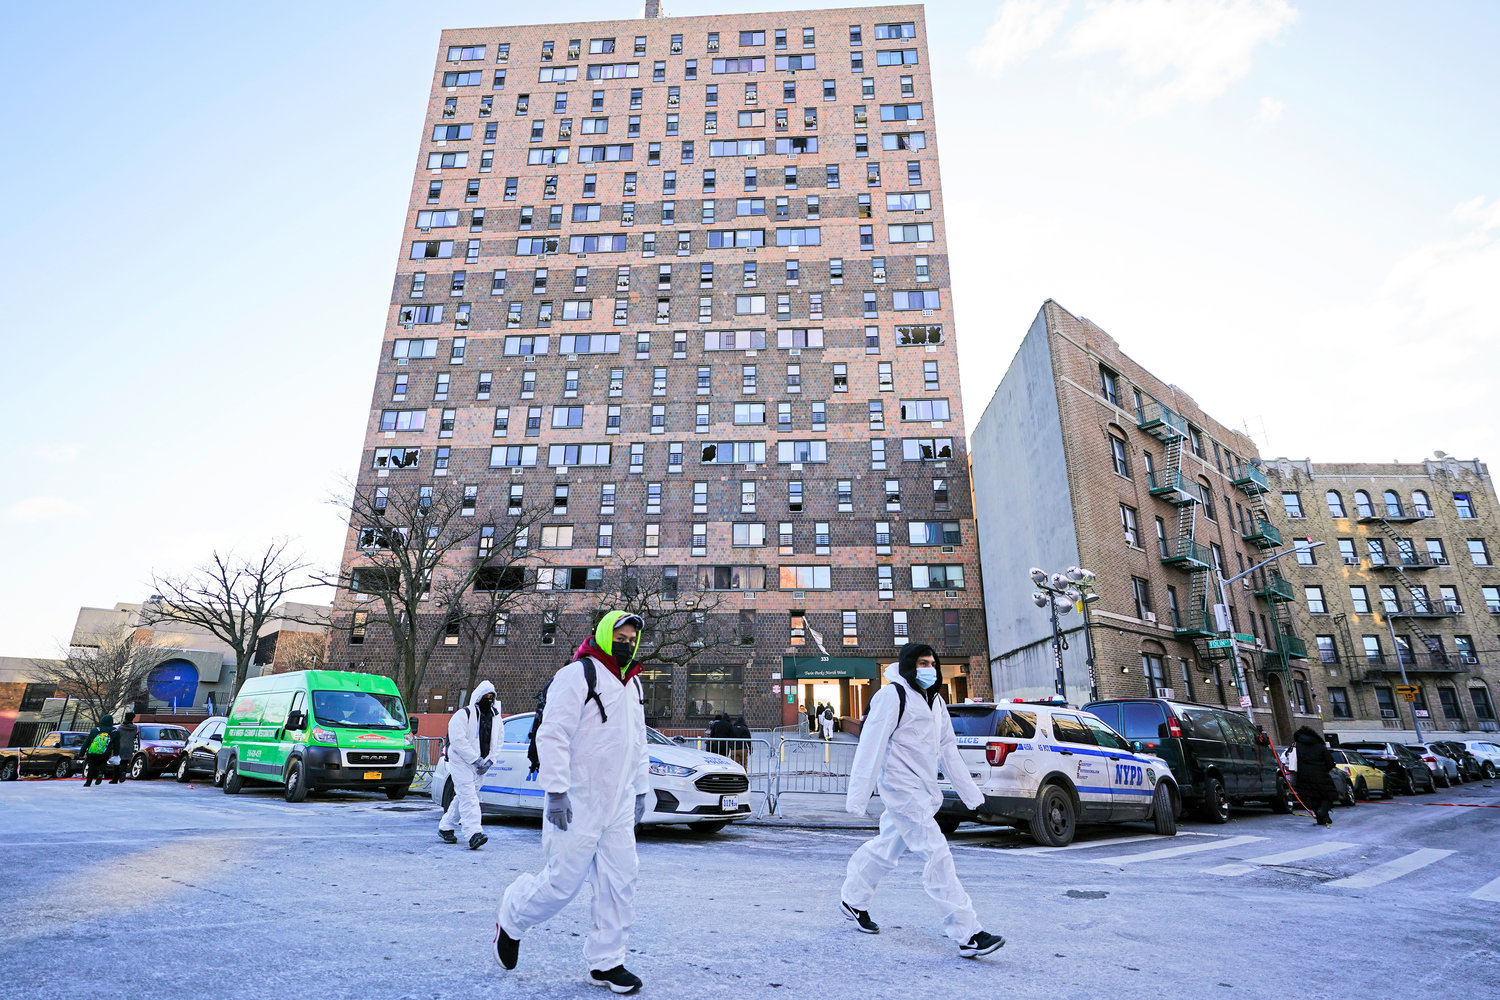 CLEANING UP — Workers in protective clothing walk from an apartment building which suffered the city’s deadliest fire in three decades, in the Bronx borough of New York, Tuesday, Jan. 11, 2022. A malfunctioning electric space heater apparently started the fire Sunday in the 19-story building in the Bronx, fire officials said.